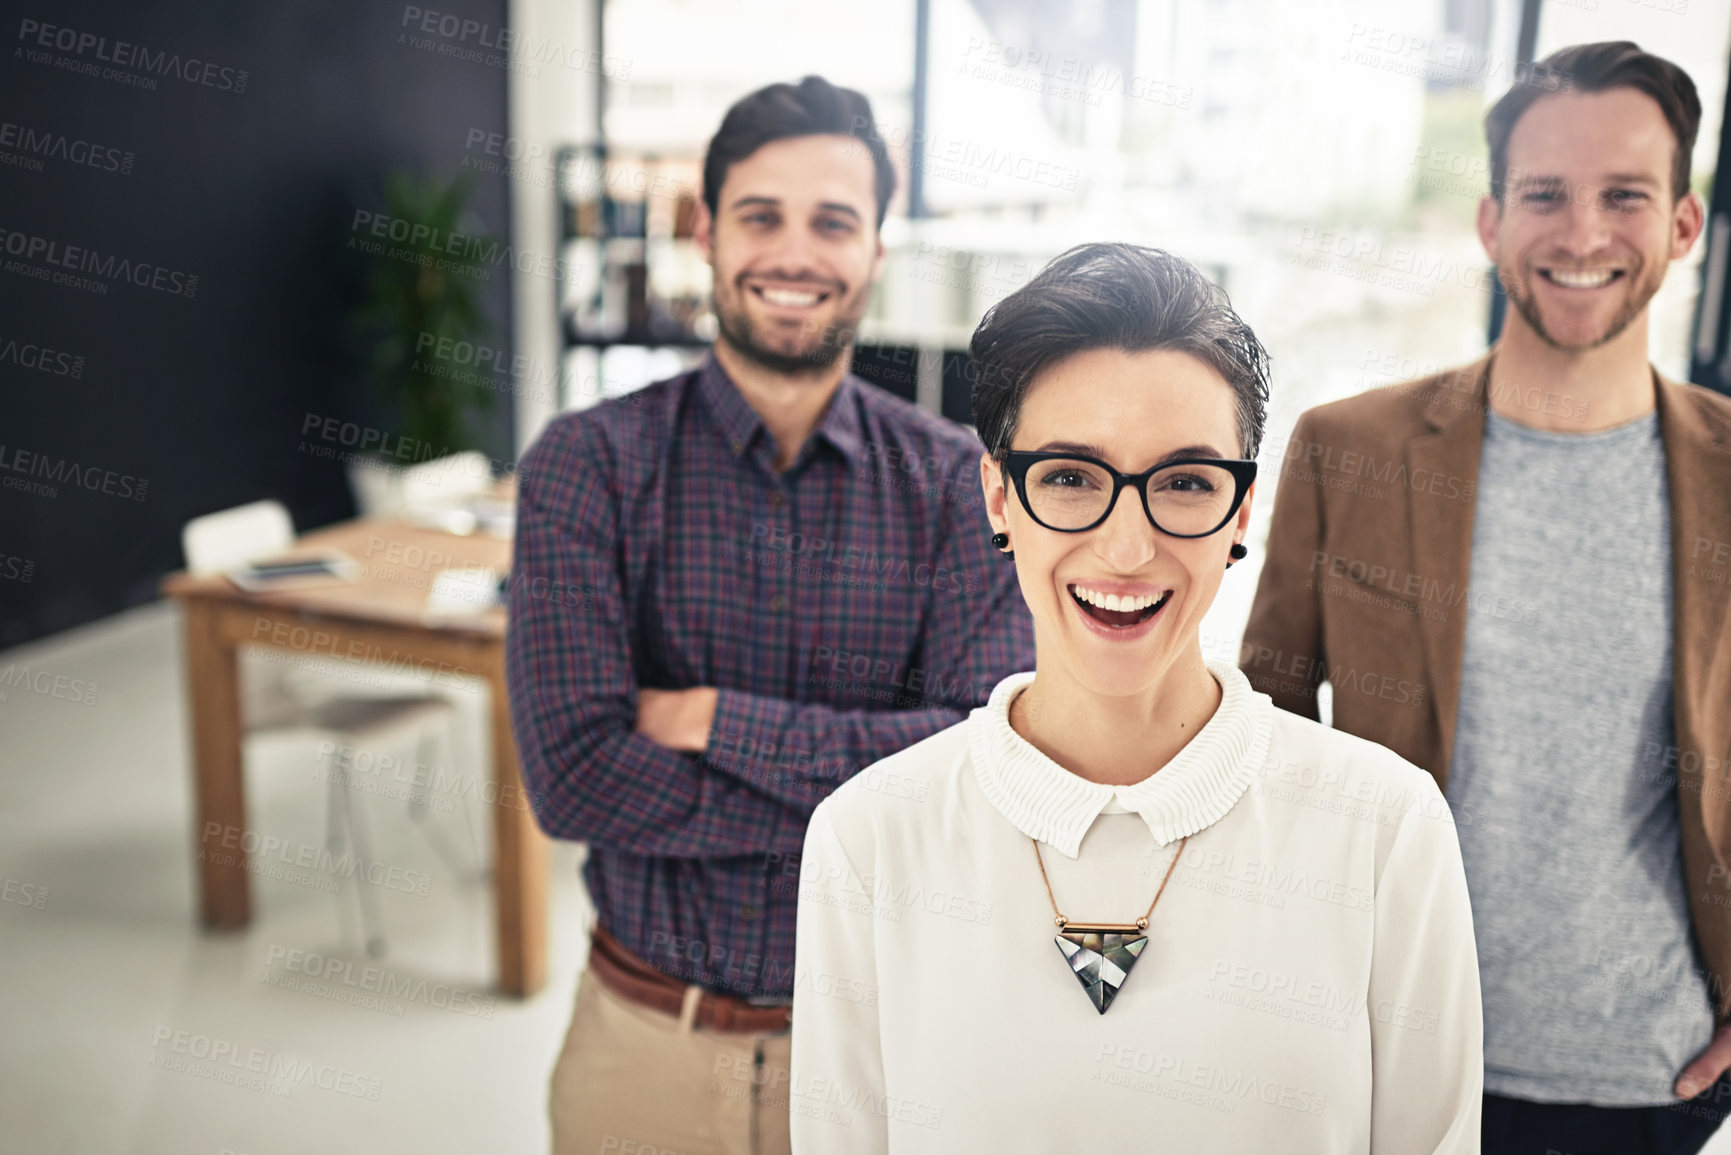 Buy stock photo Portrait, teamwork and leadership with a business woman and her team standing in the office together. Management, leader and collaboration with a group of businesspeople looking confident about work